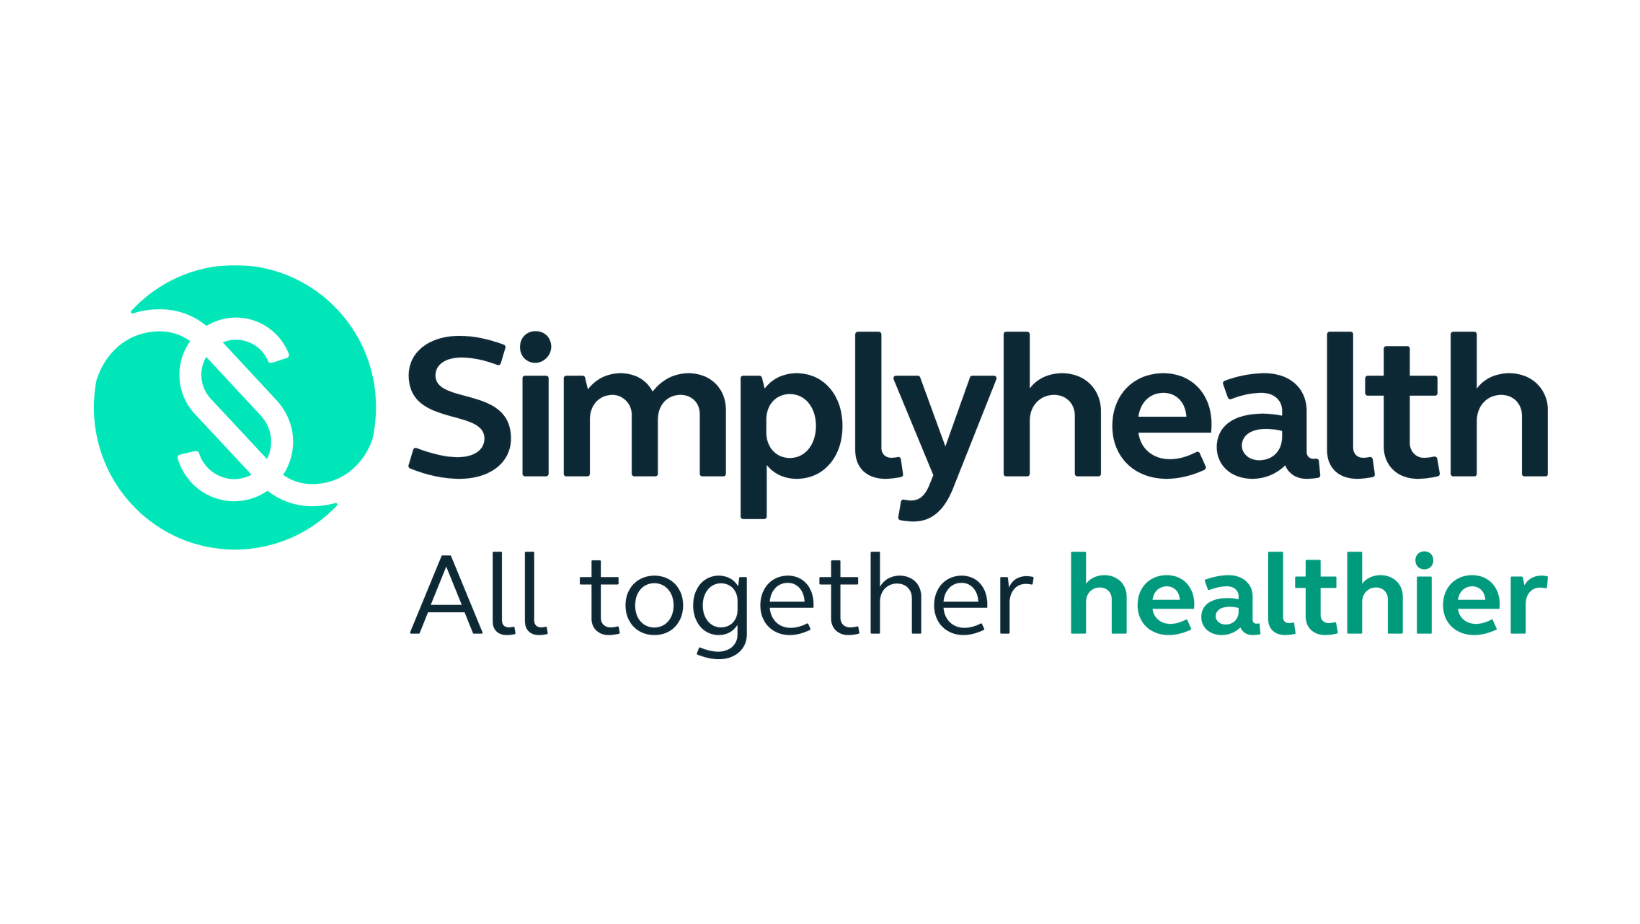 Not Beyond Redemption has been awarded funding from Simplyhealth!